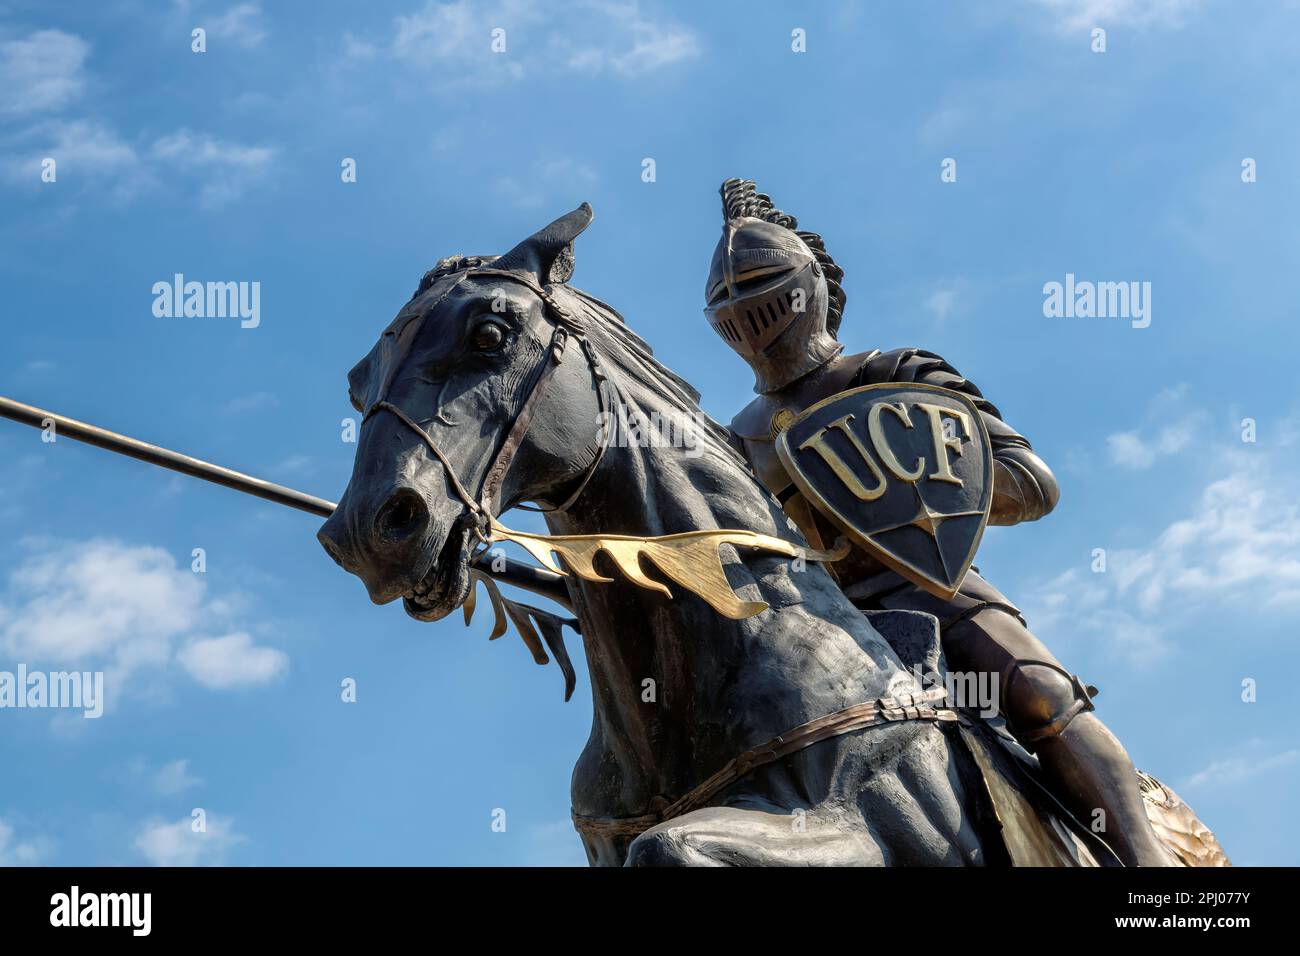 Knight on the horse statue in the University of Central Florida Stock Photo